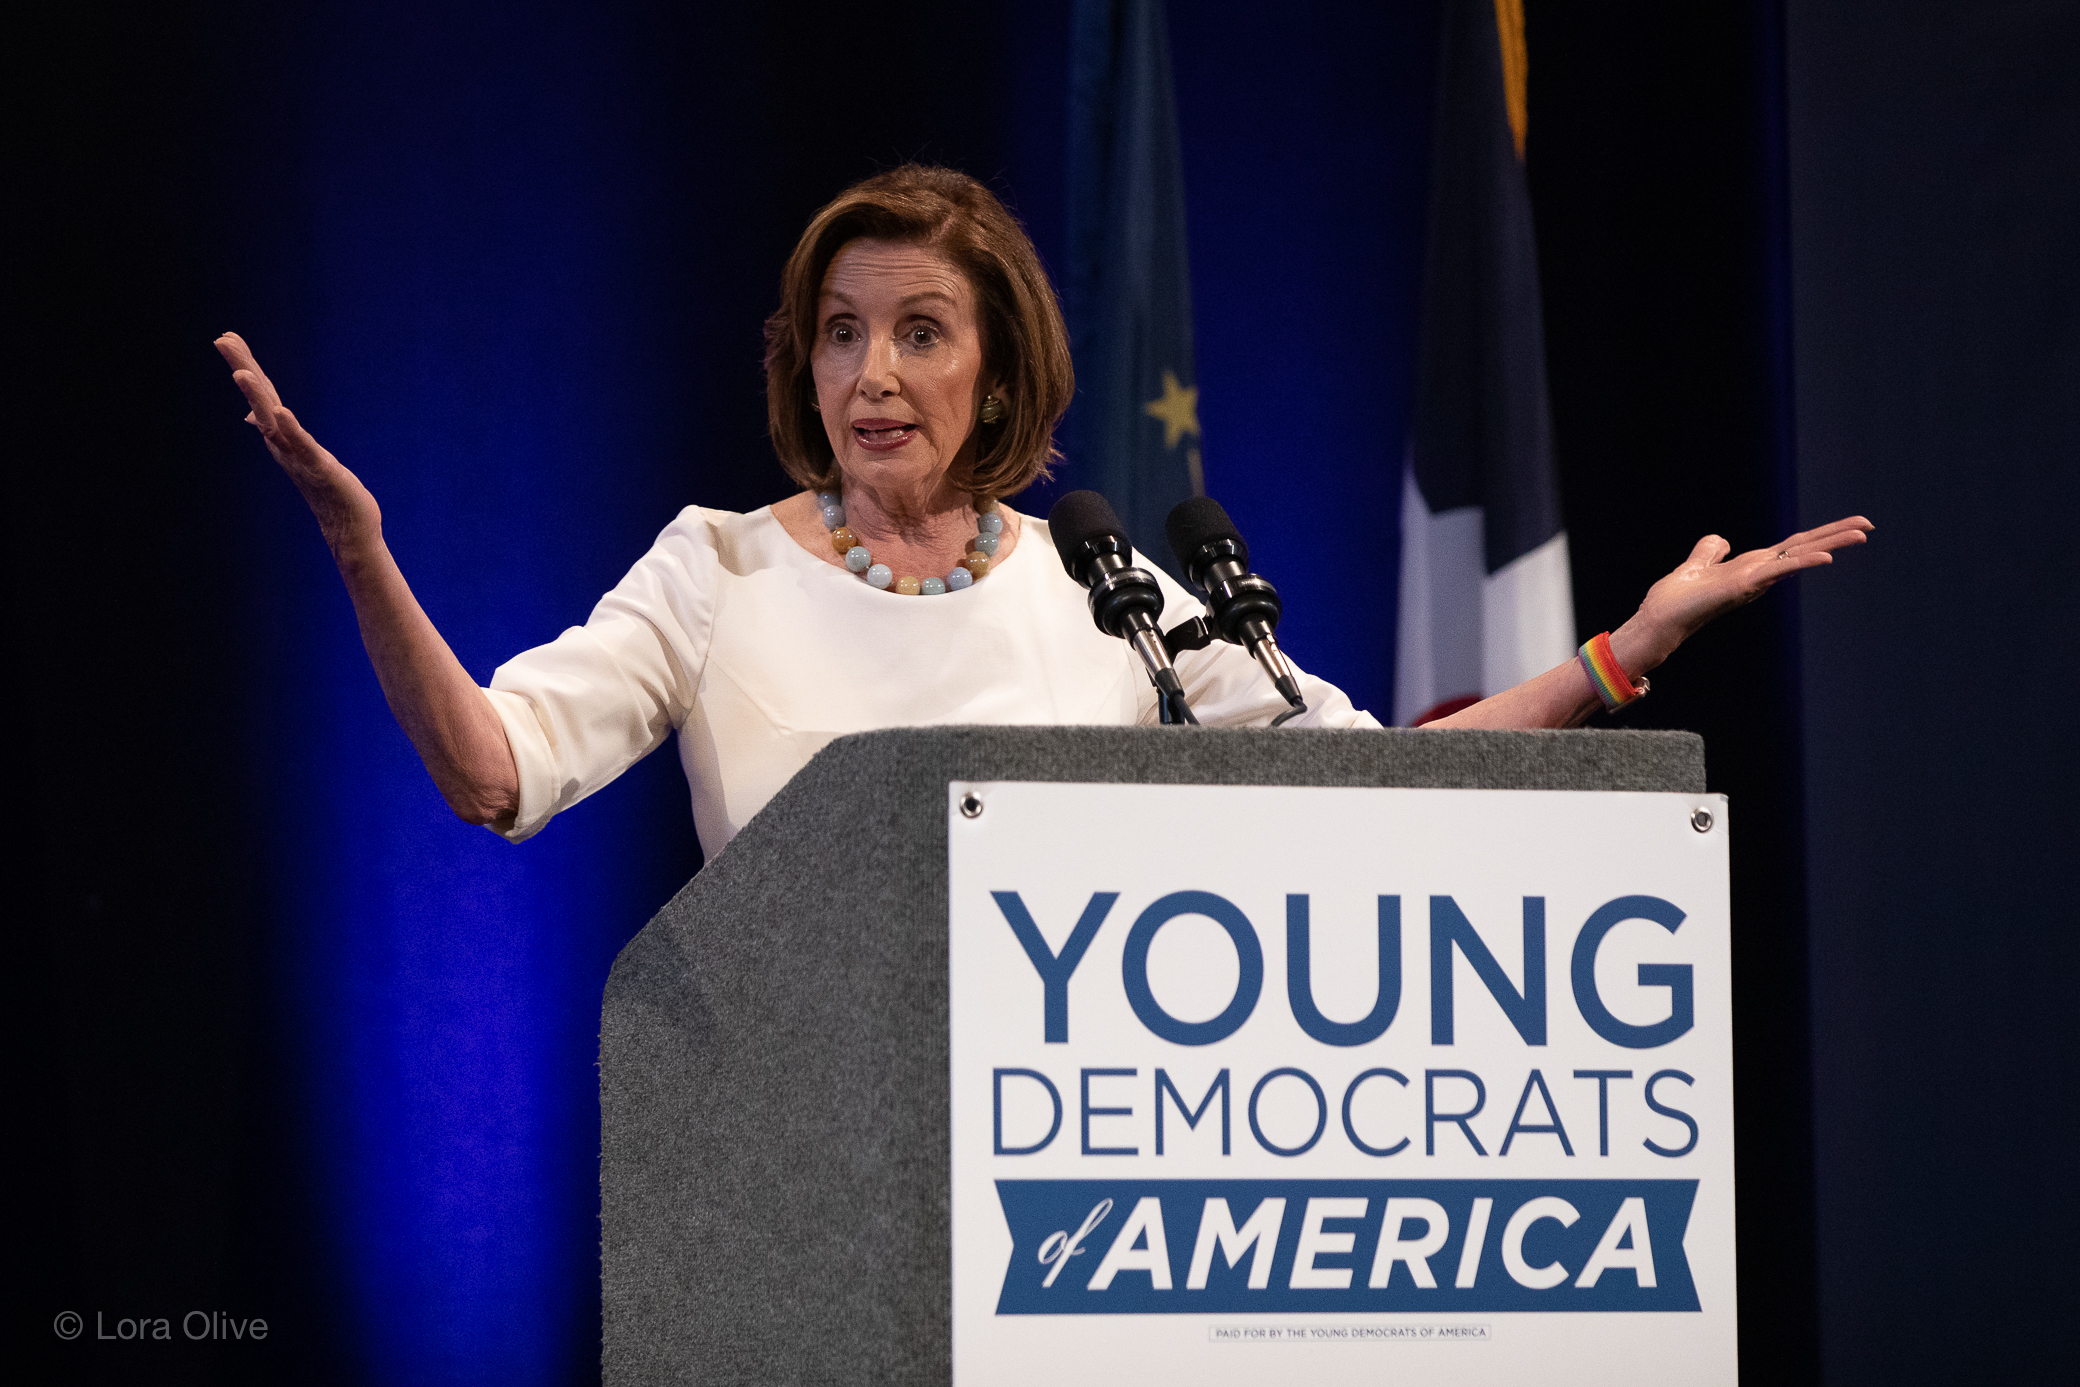 Nancy Pelosi Speaks at the Young Democrats of America Annual Conference